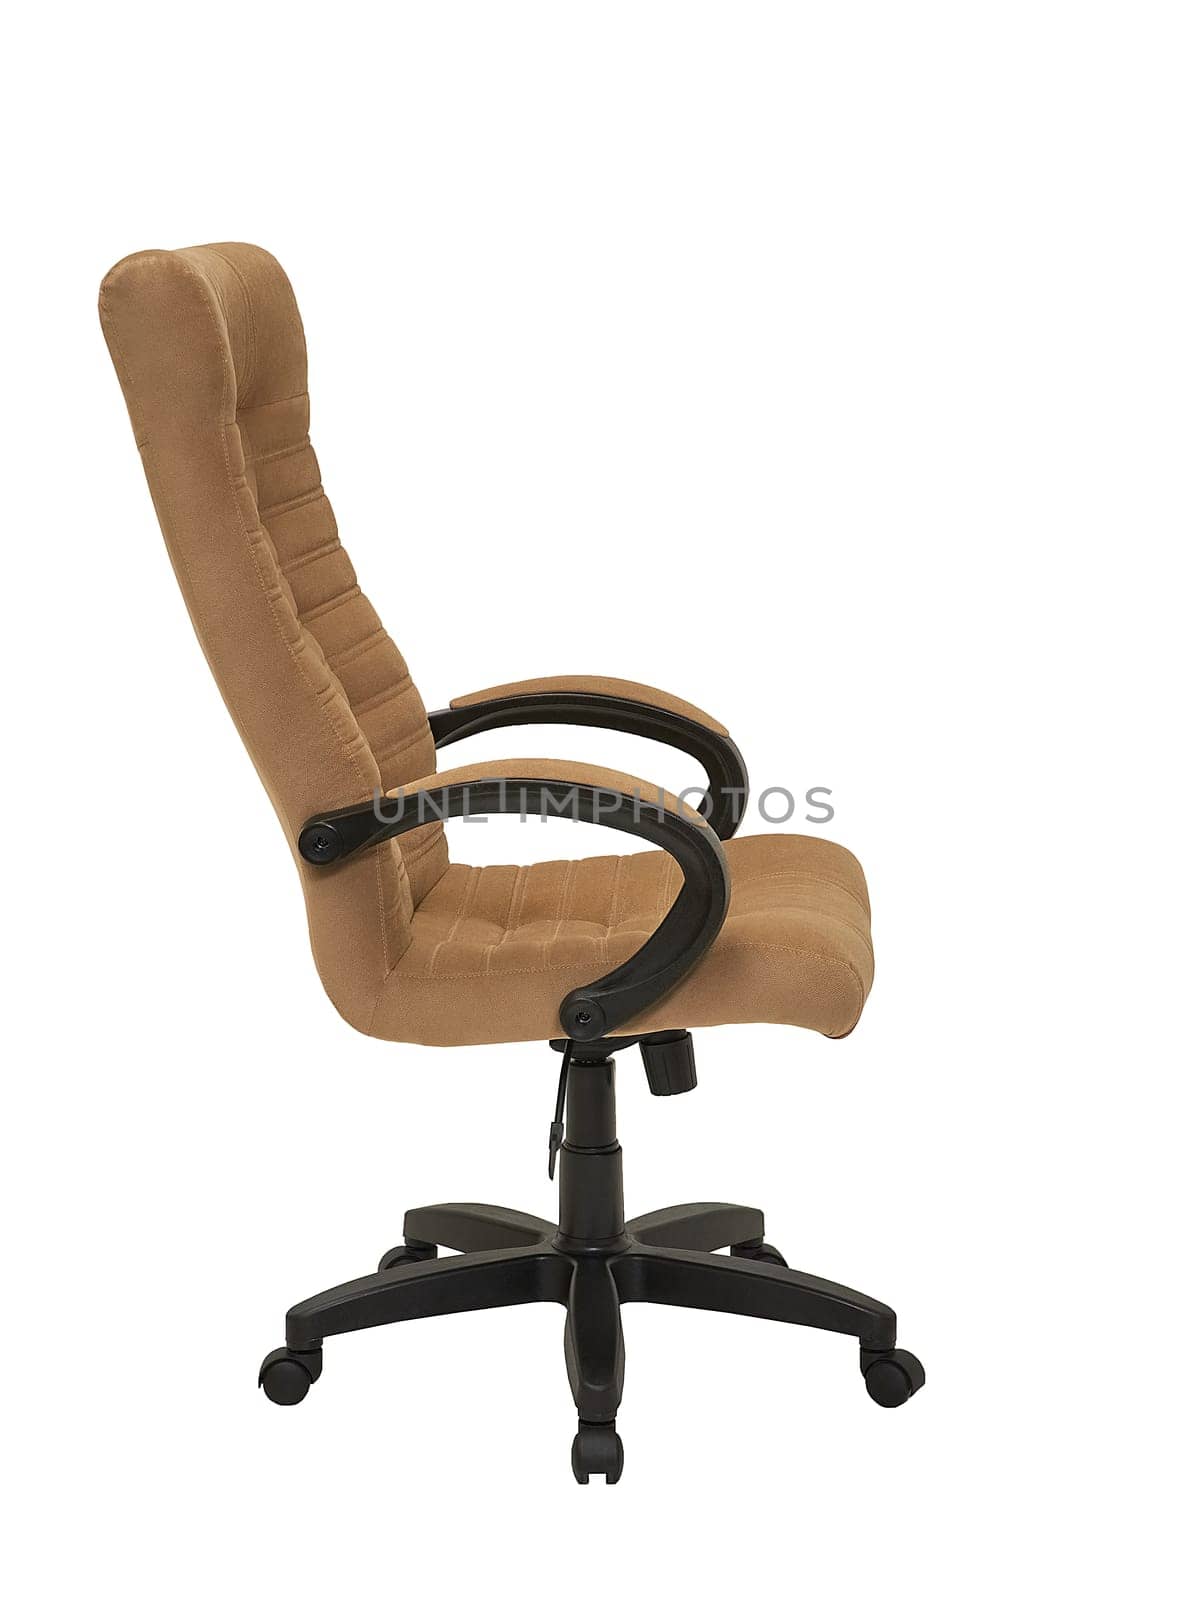 beige office fabric armchair on wheels isolated on white background, side view. modern furniture, interior, home design